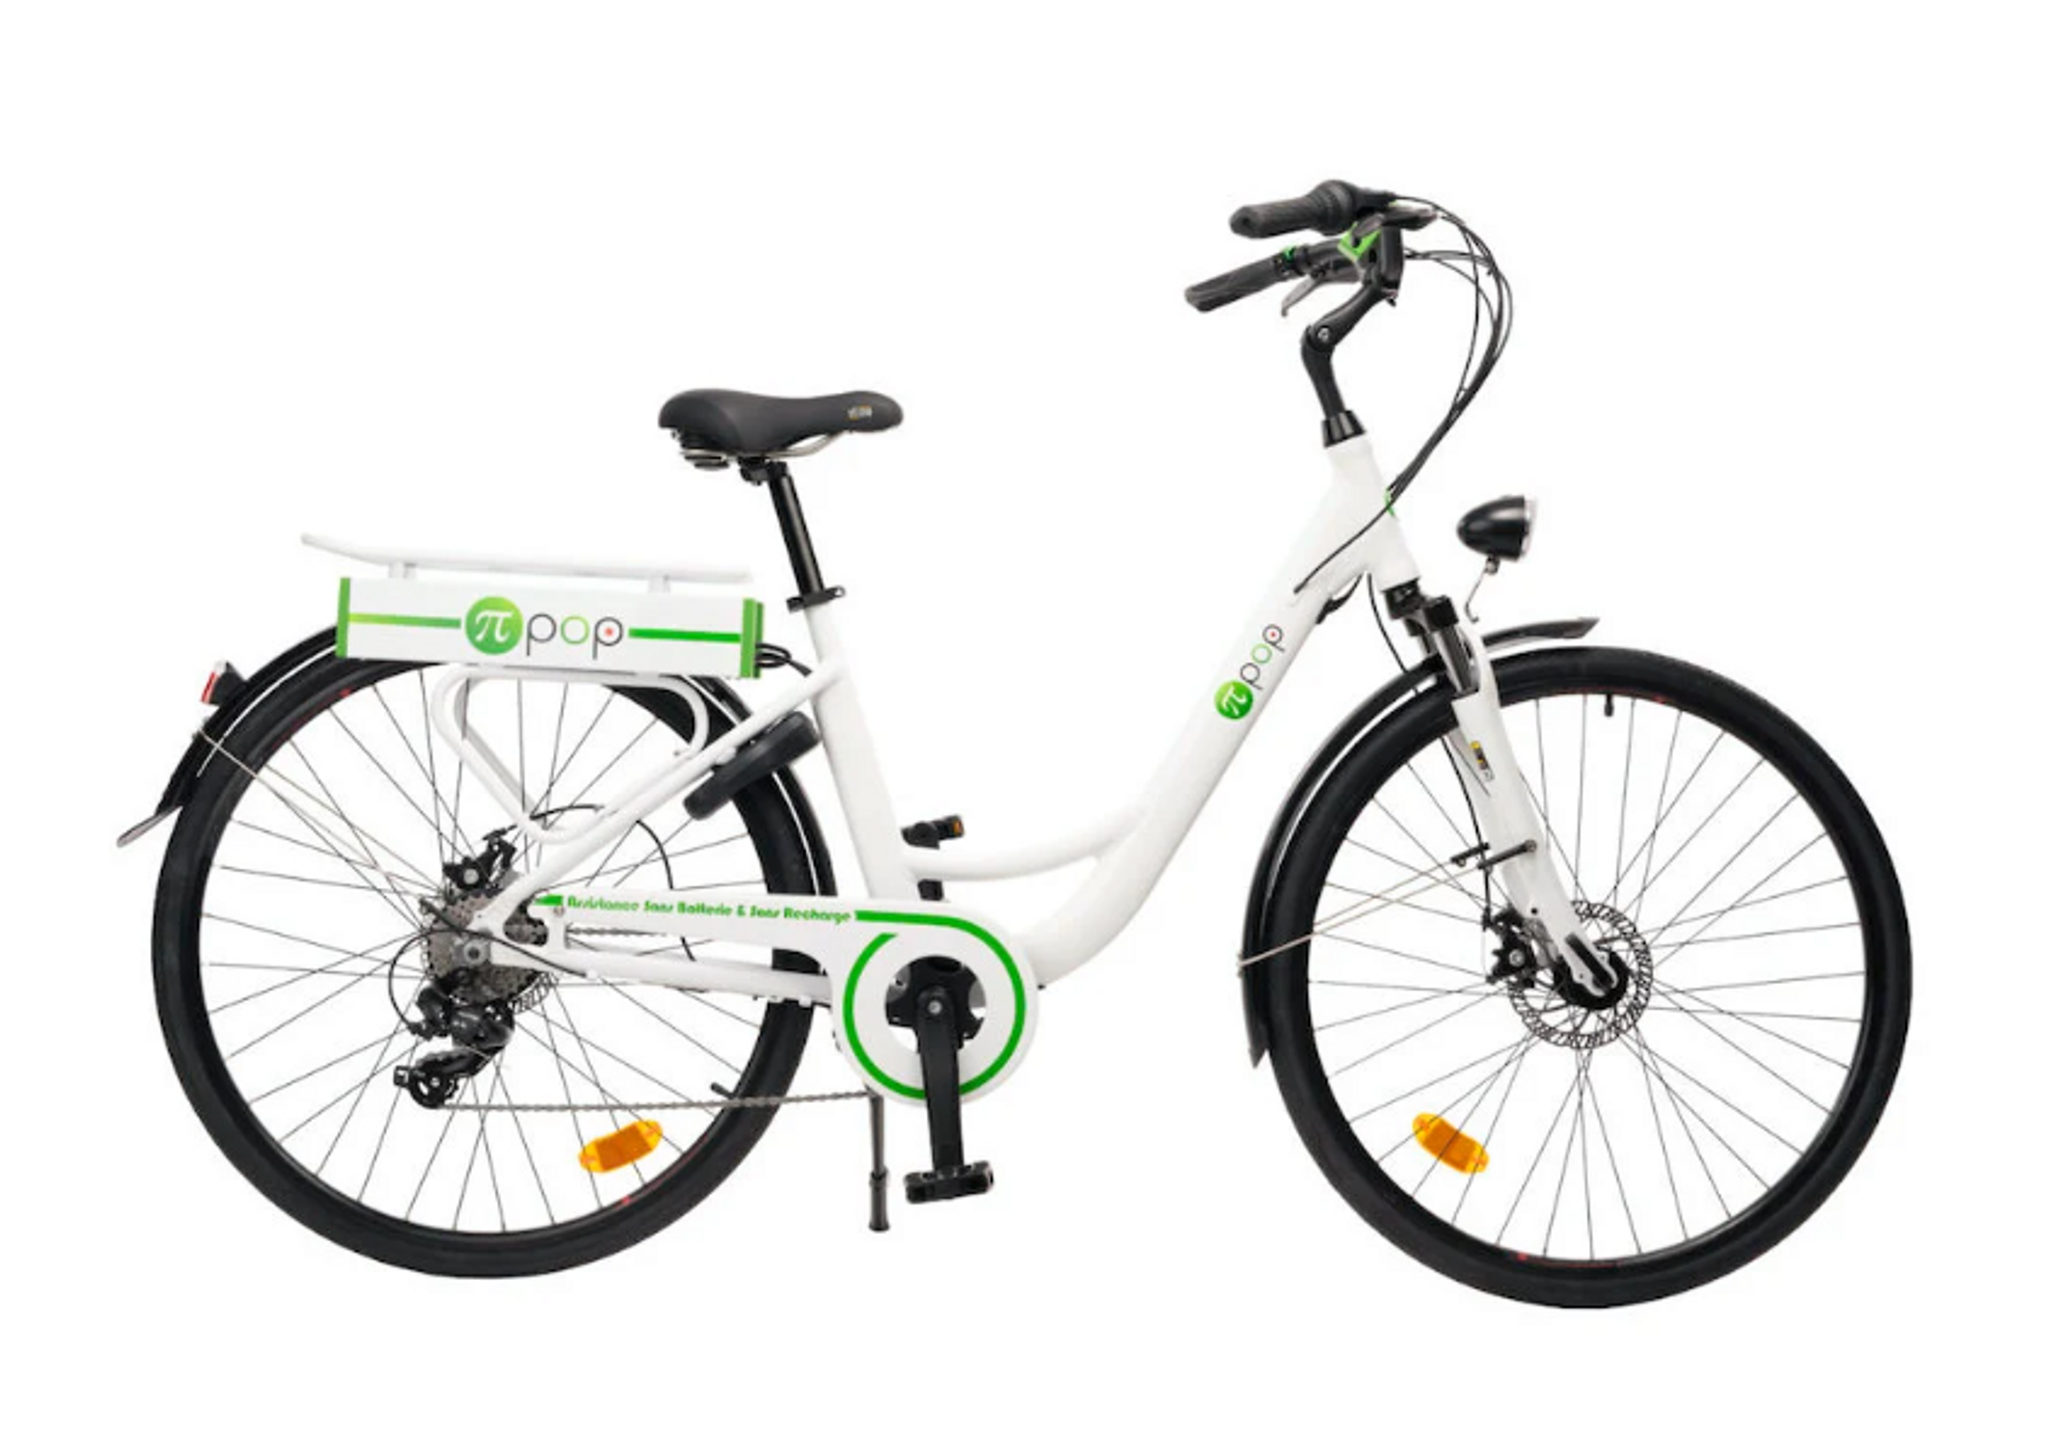 Pi-POP offers French cyclists a lithium-free e-bike